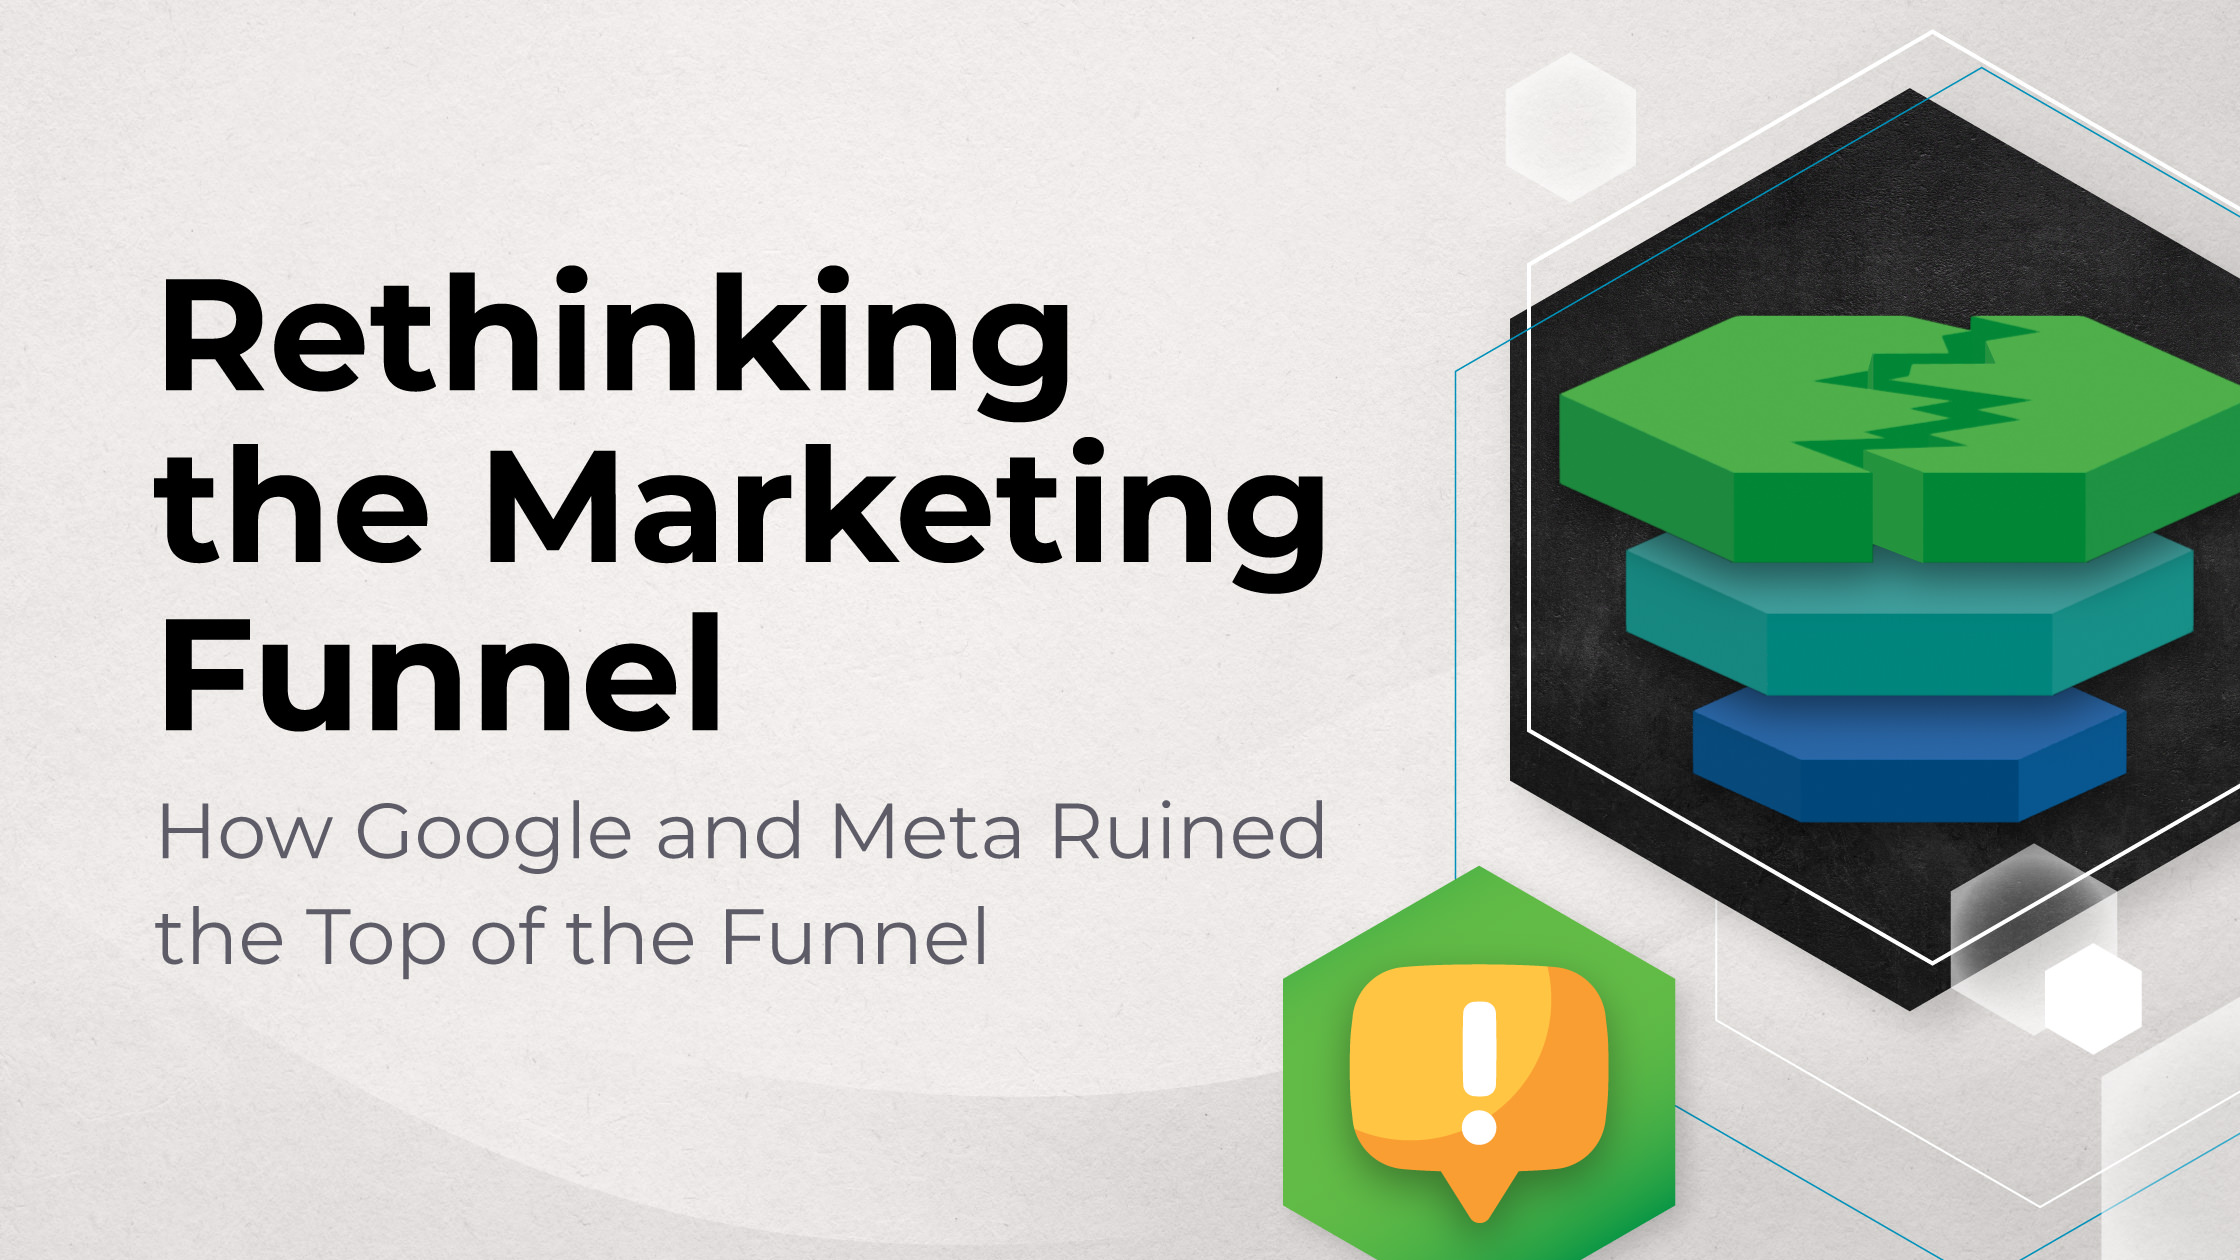 Rethinking the Marketing Funnel: How Google and Meta Ruined the Top of the Funnel